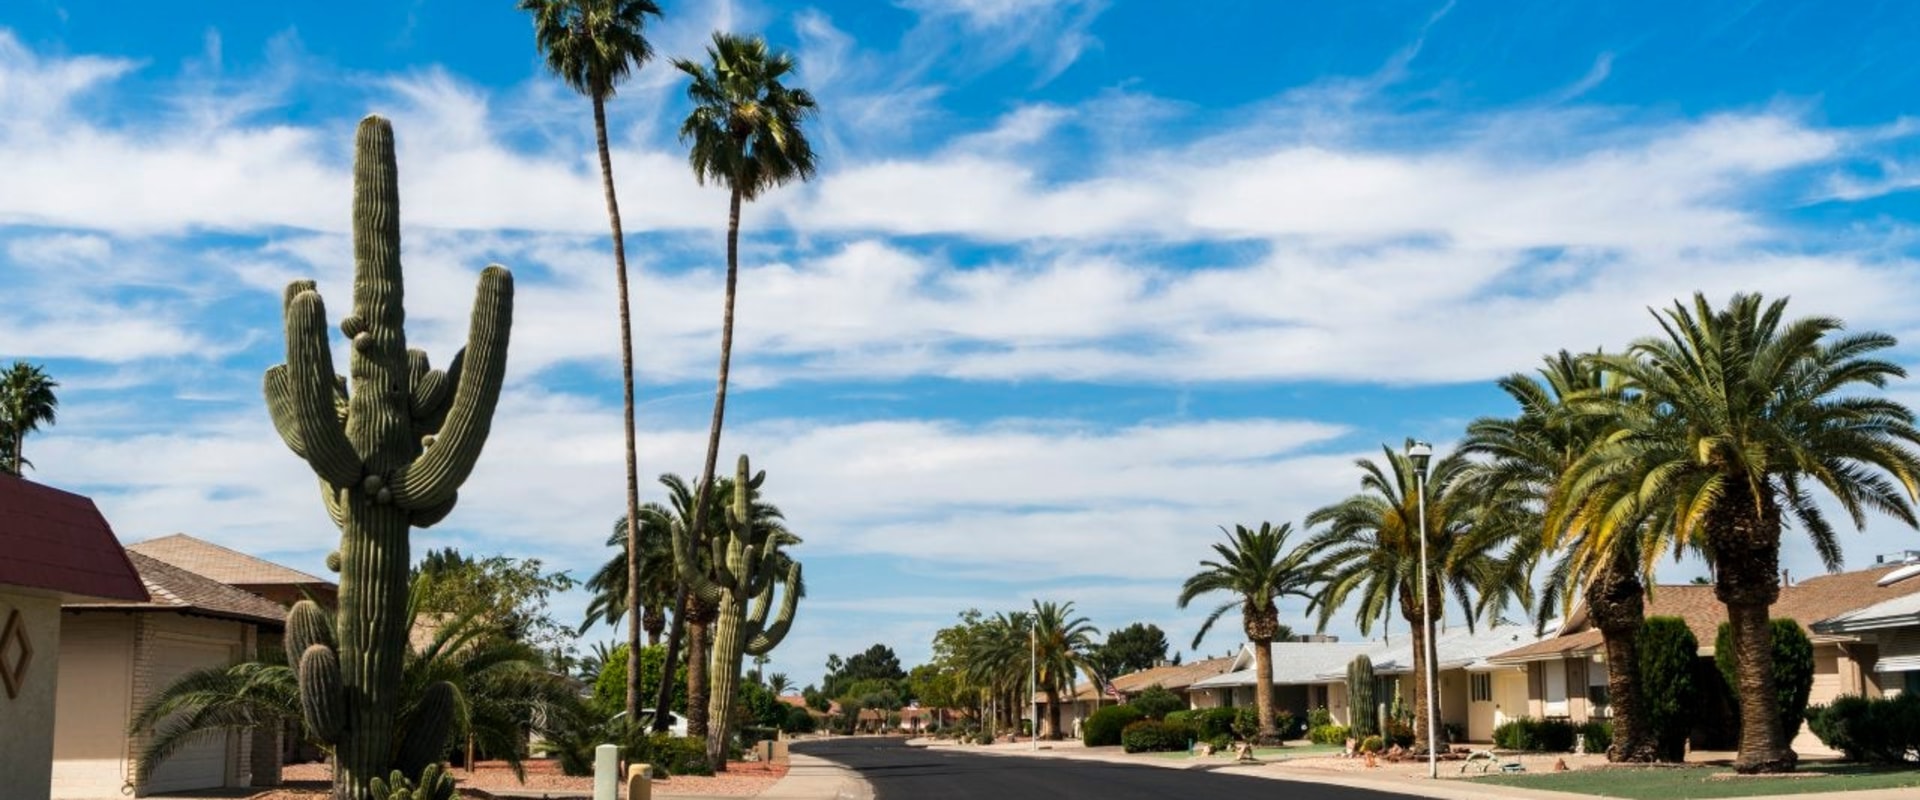 Understanding Market Conditions and Home Prices in Arizona